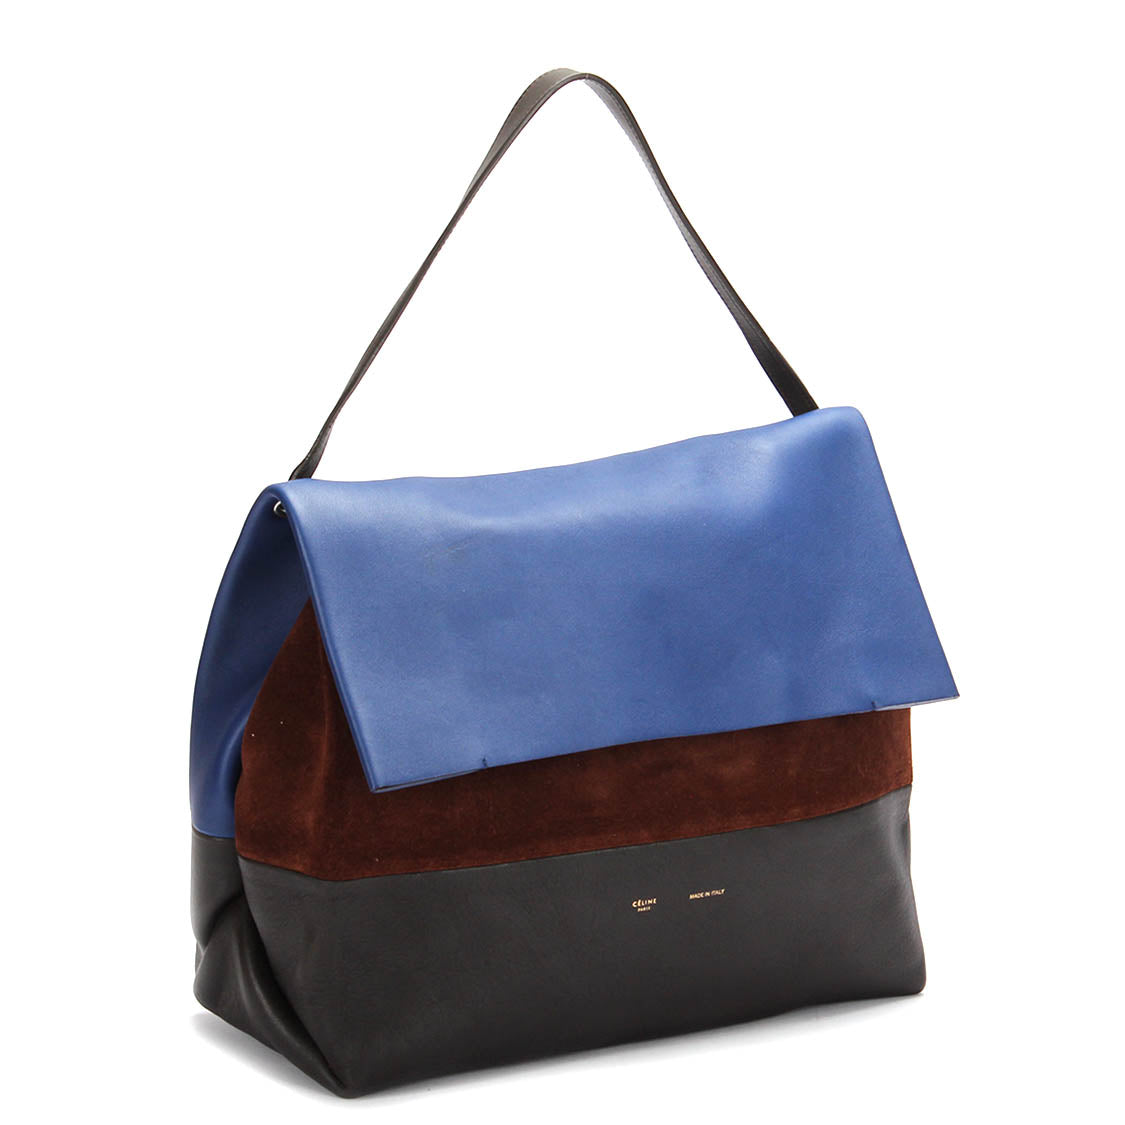 All Soft Leather Tote Bag